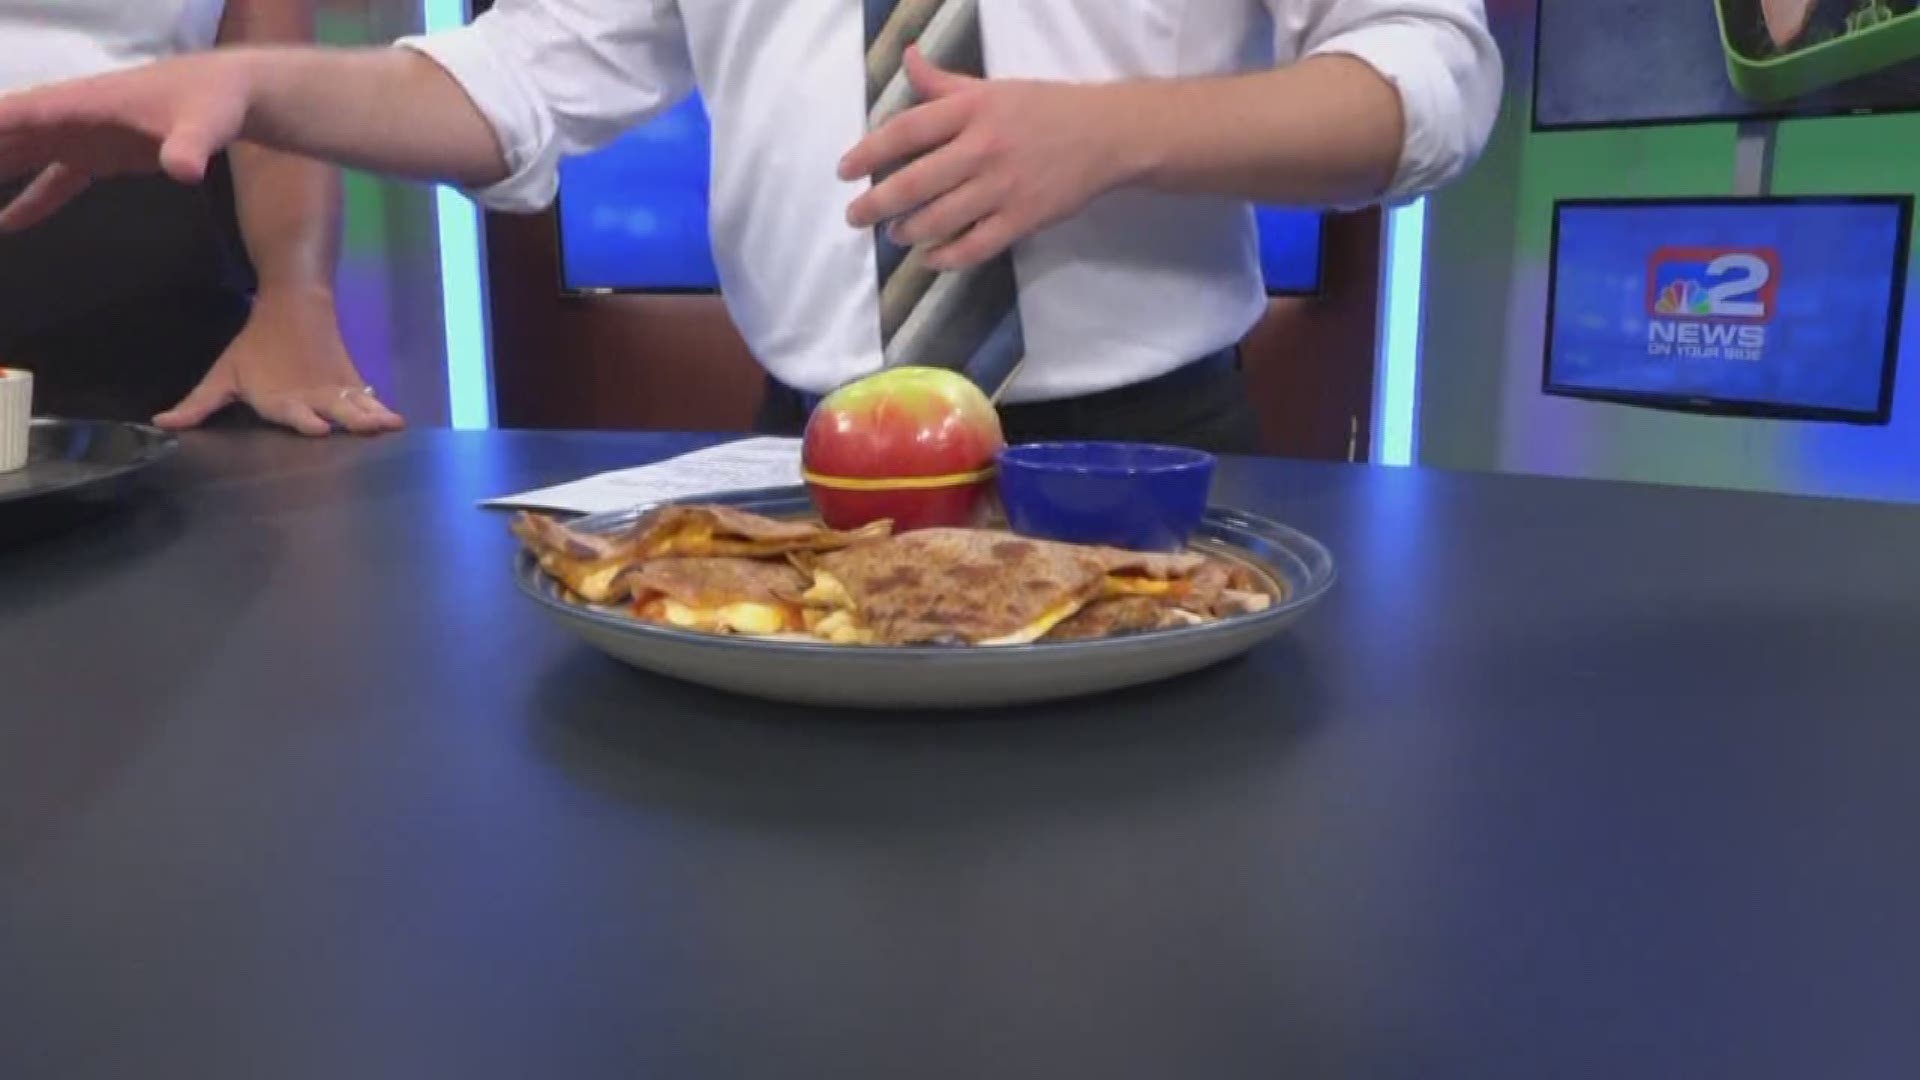 Joshua Robinson shares a simple back to school recipe for lunches